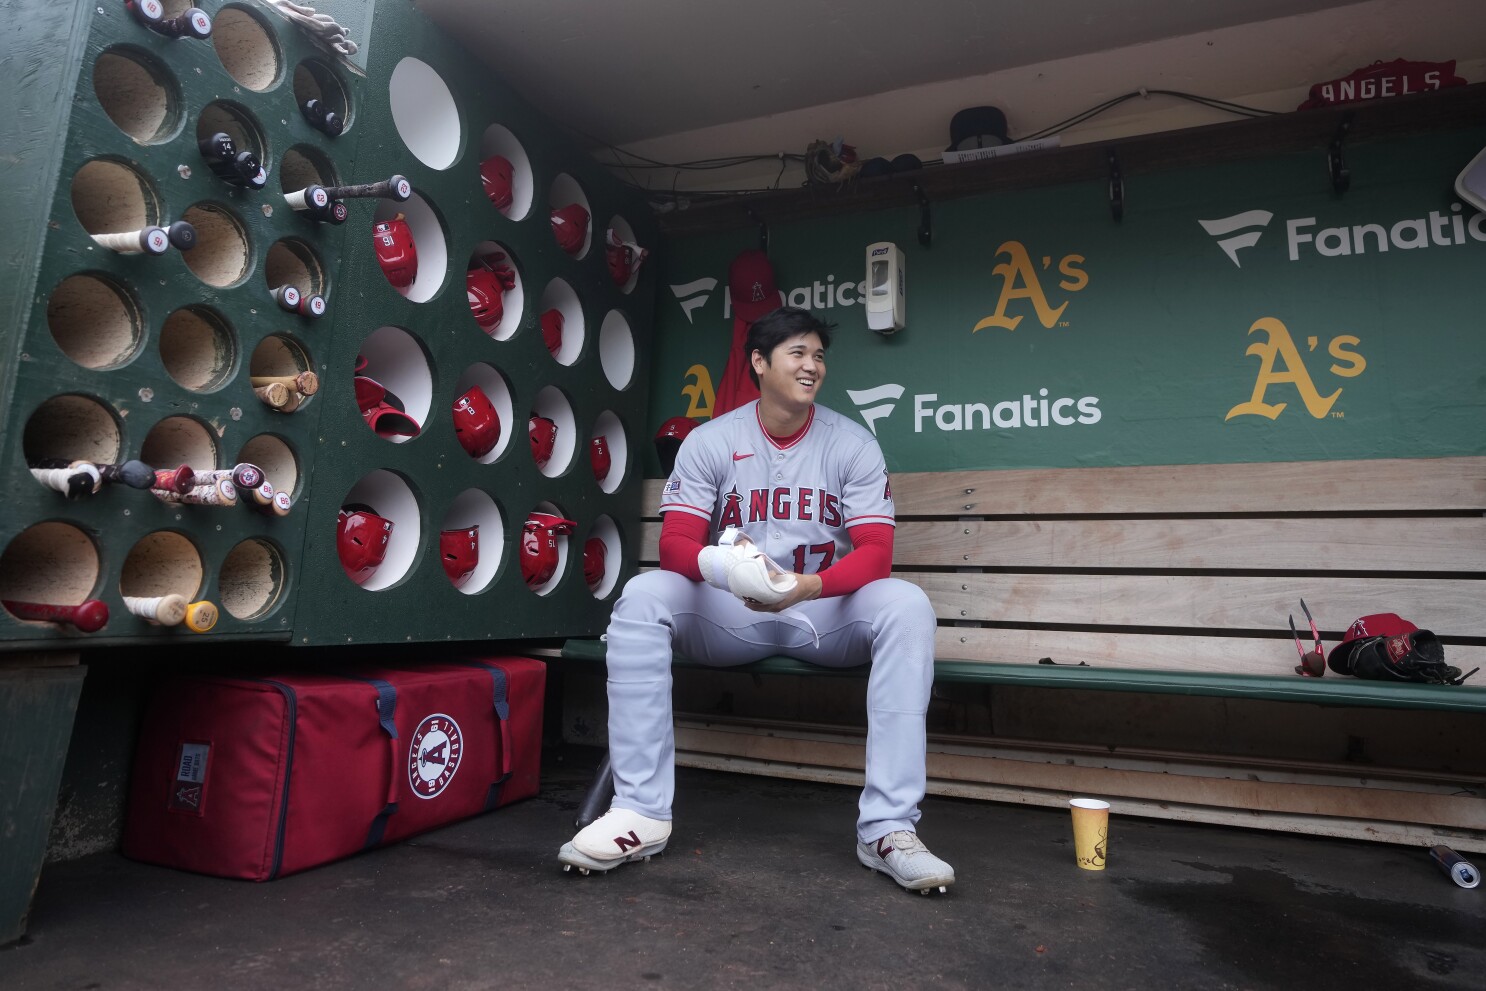 Taking a look at the Los Angeles Angels schedule month by month